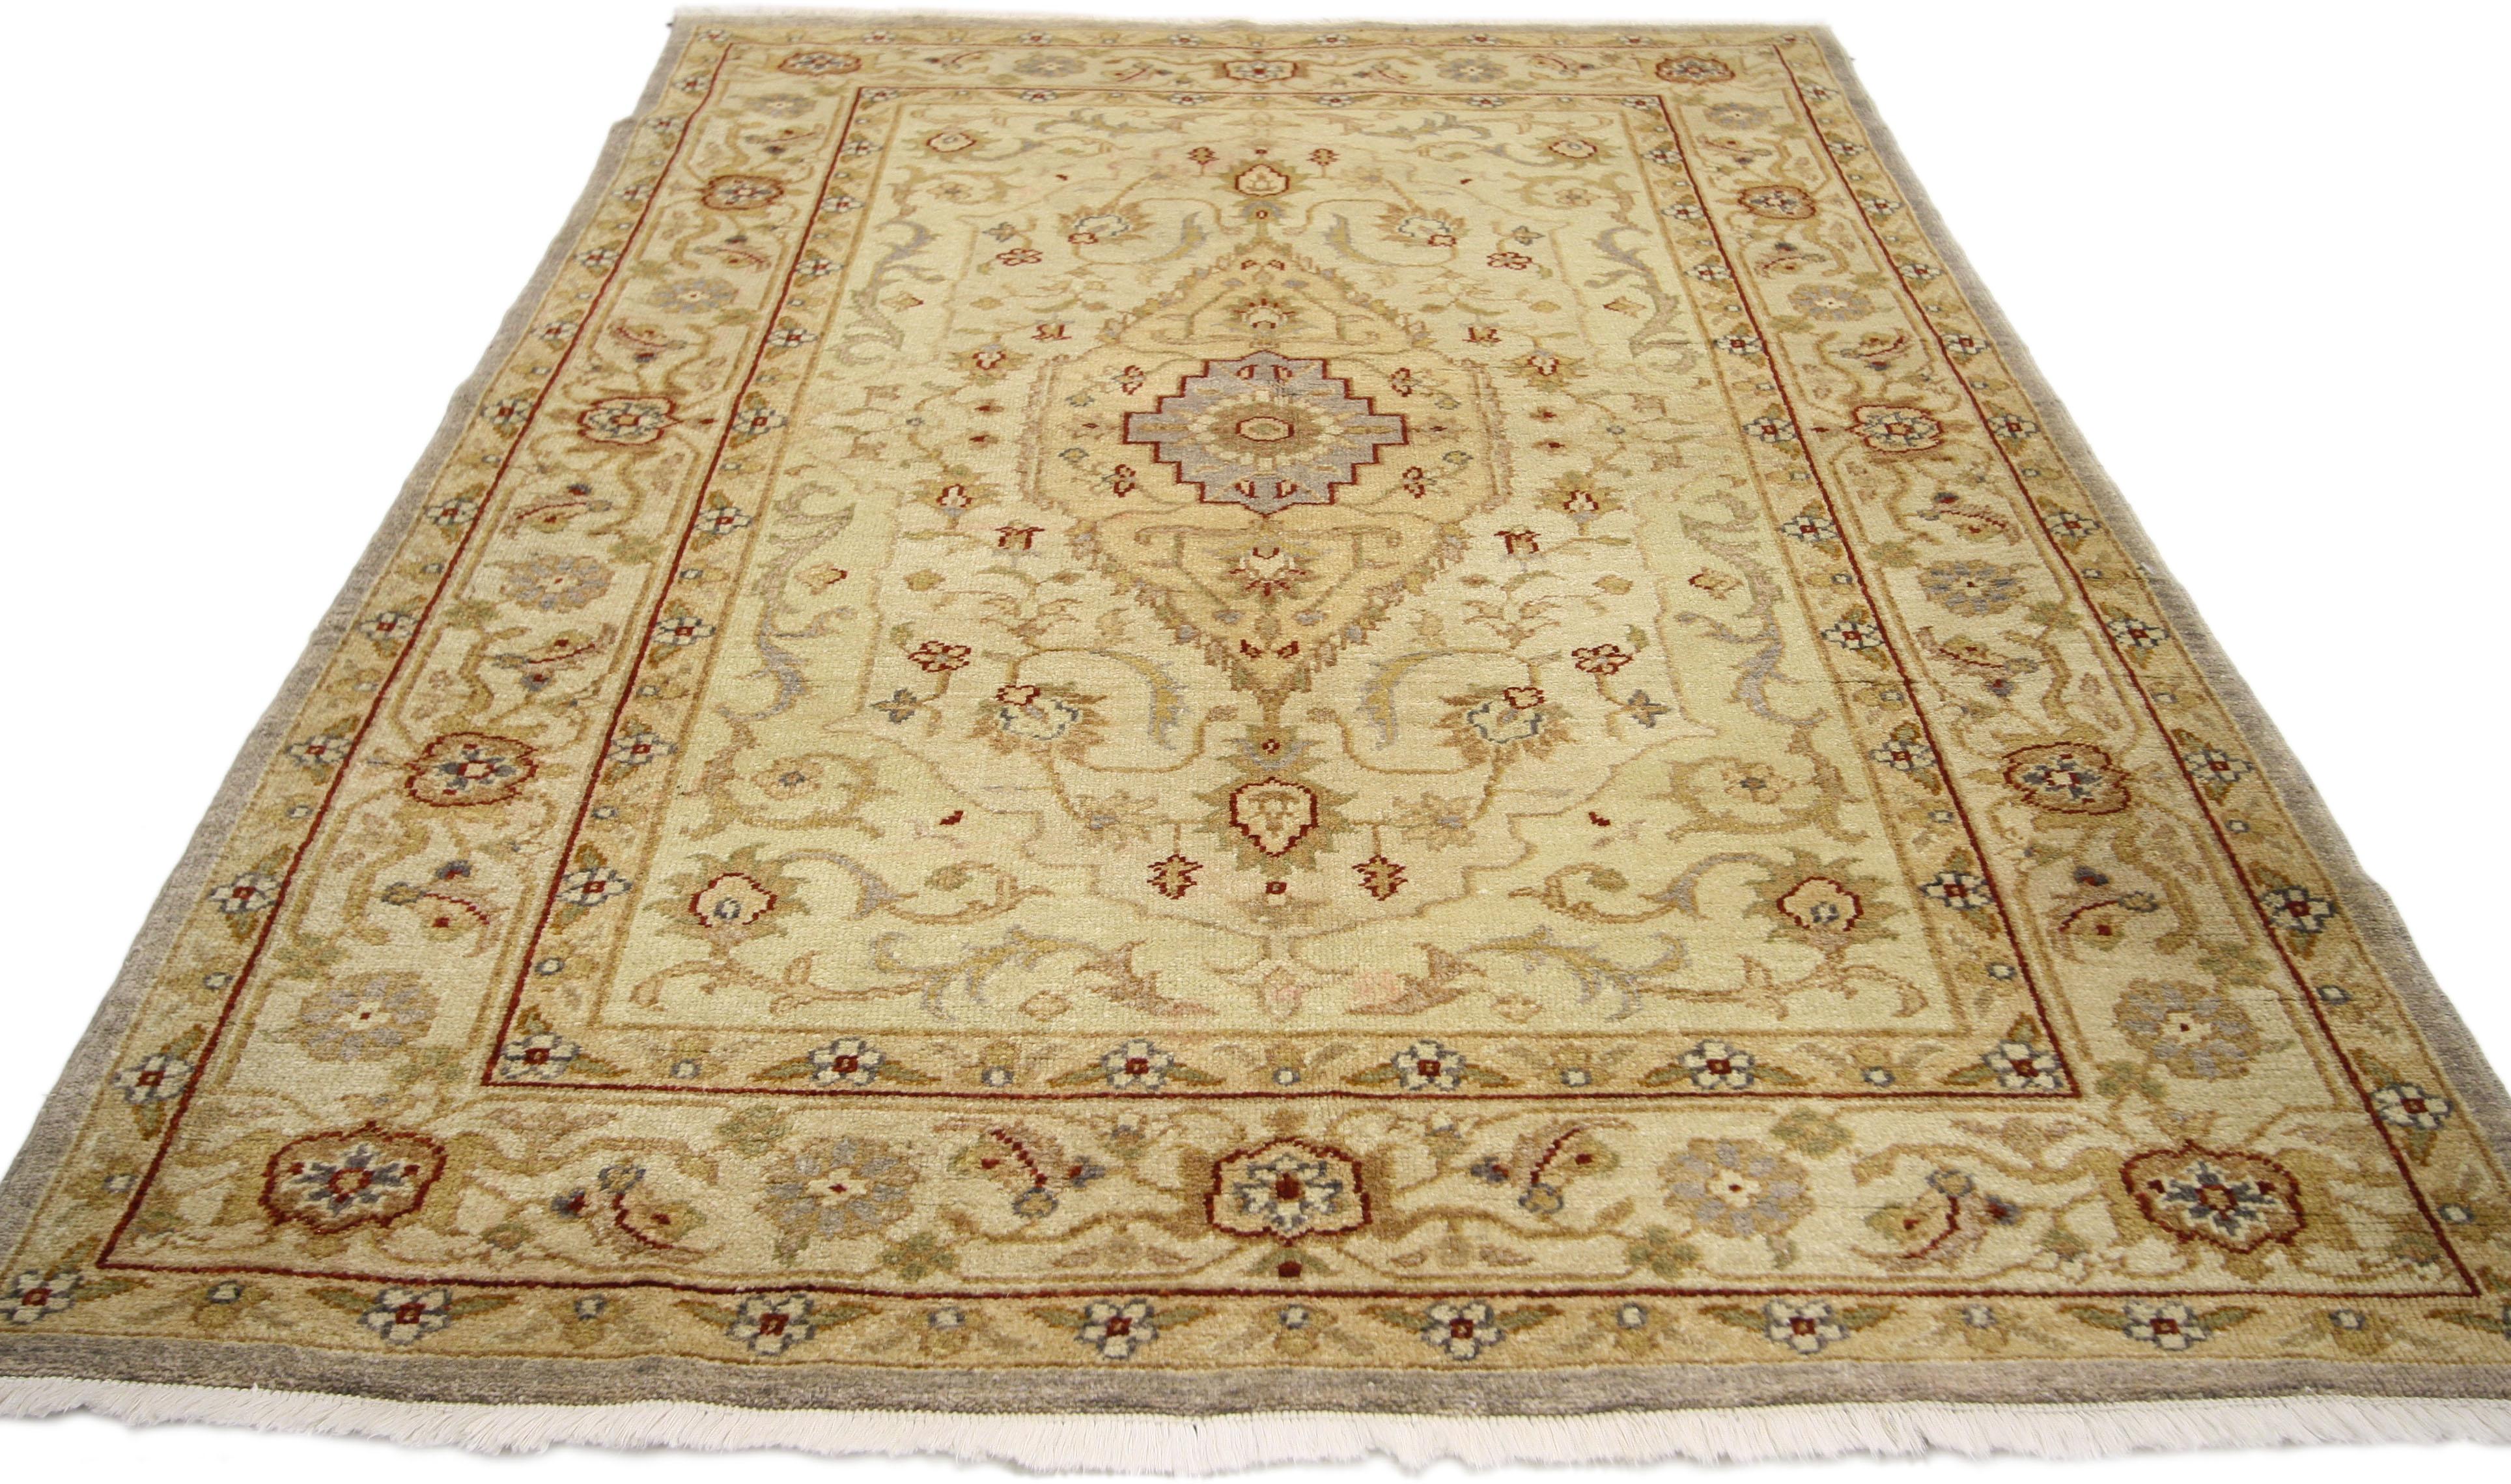 Pakistani Vintage Oushak Style Rug with Traditional Design in Warm, Golden Hues For Sale